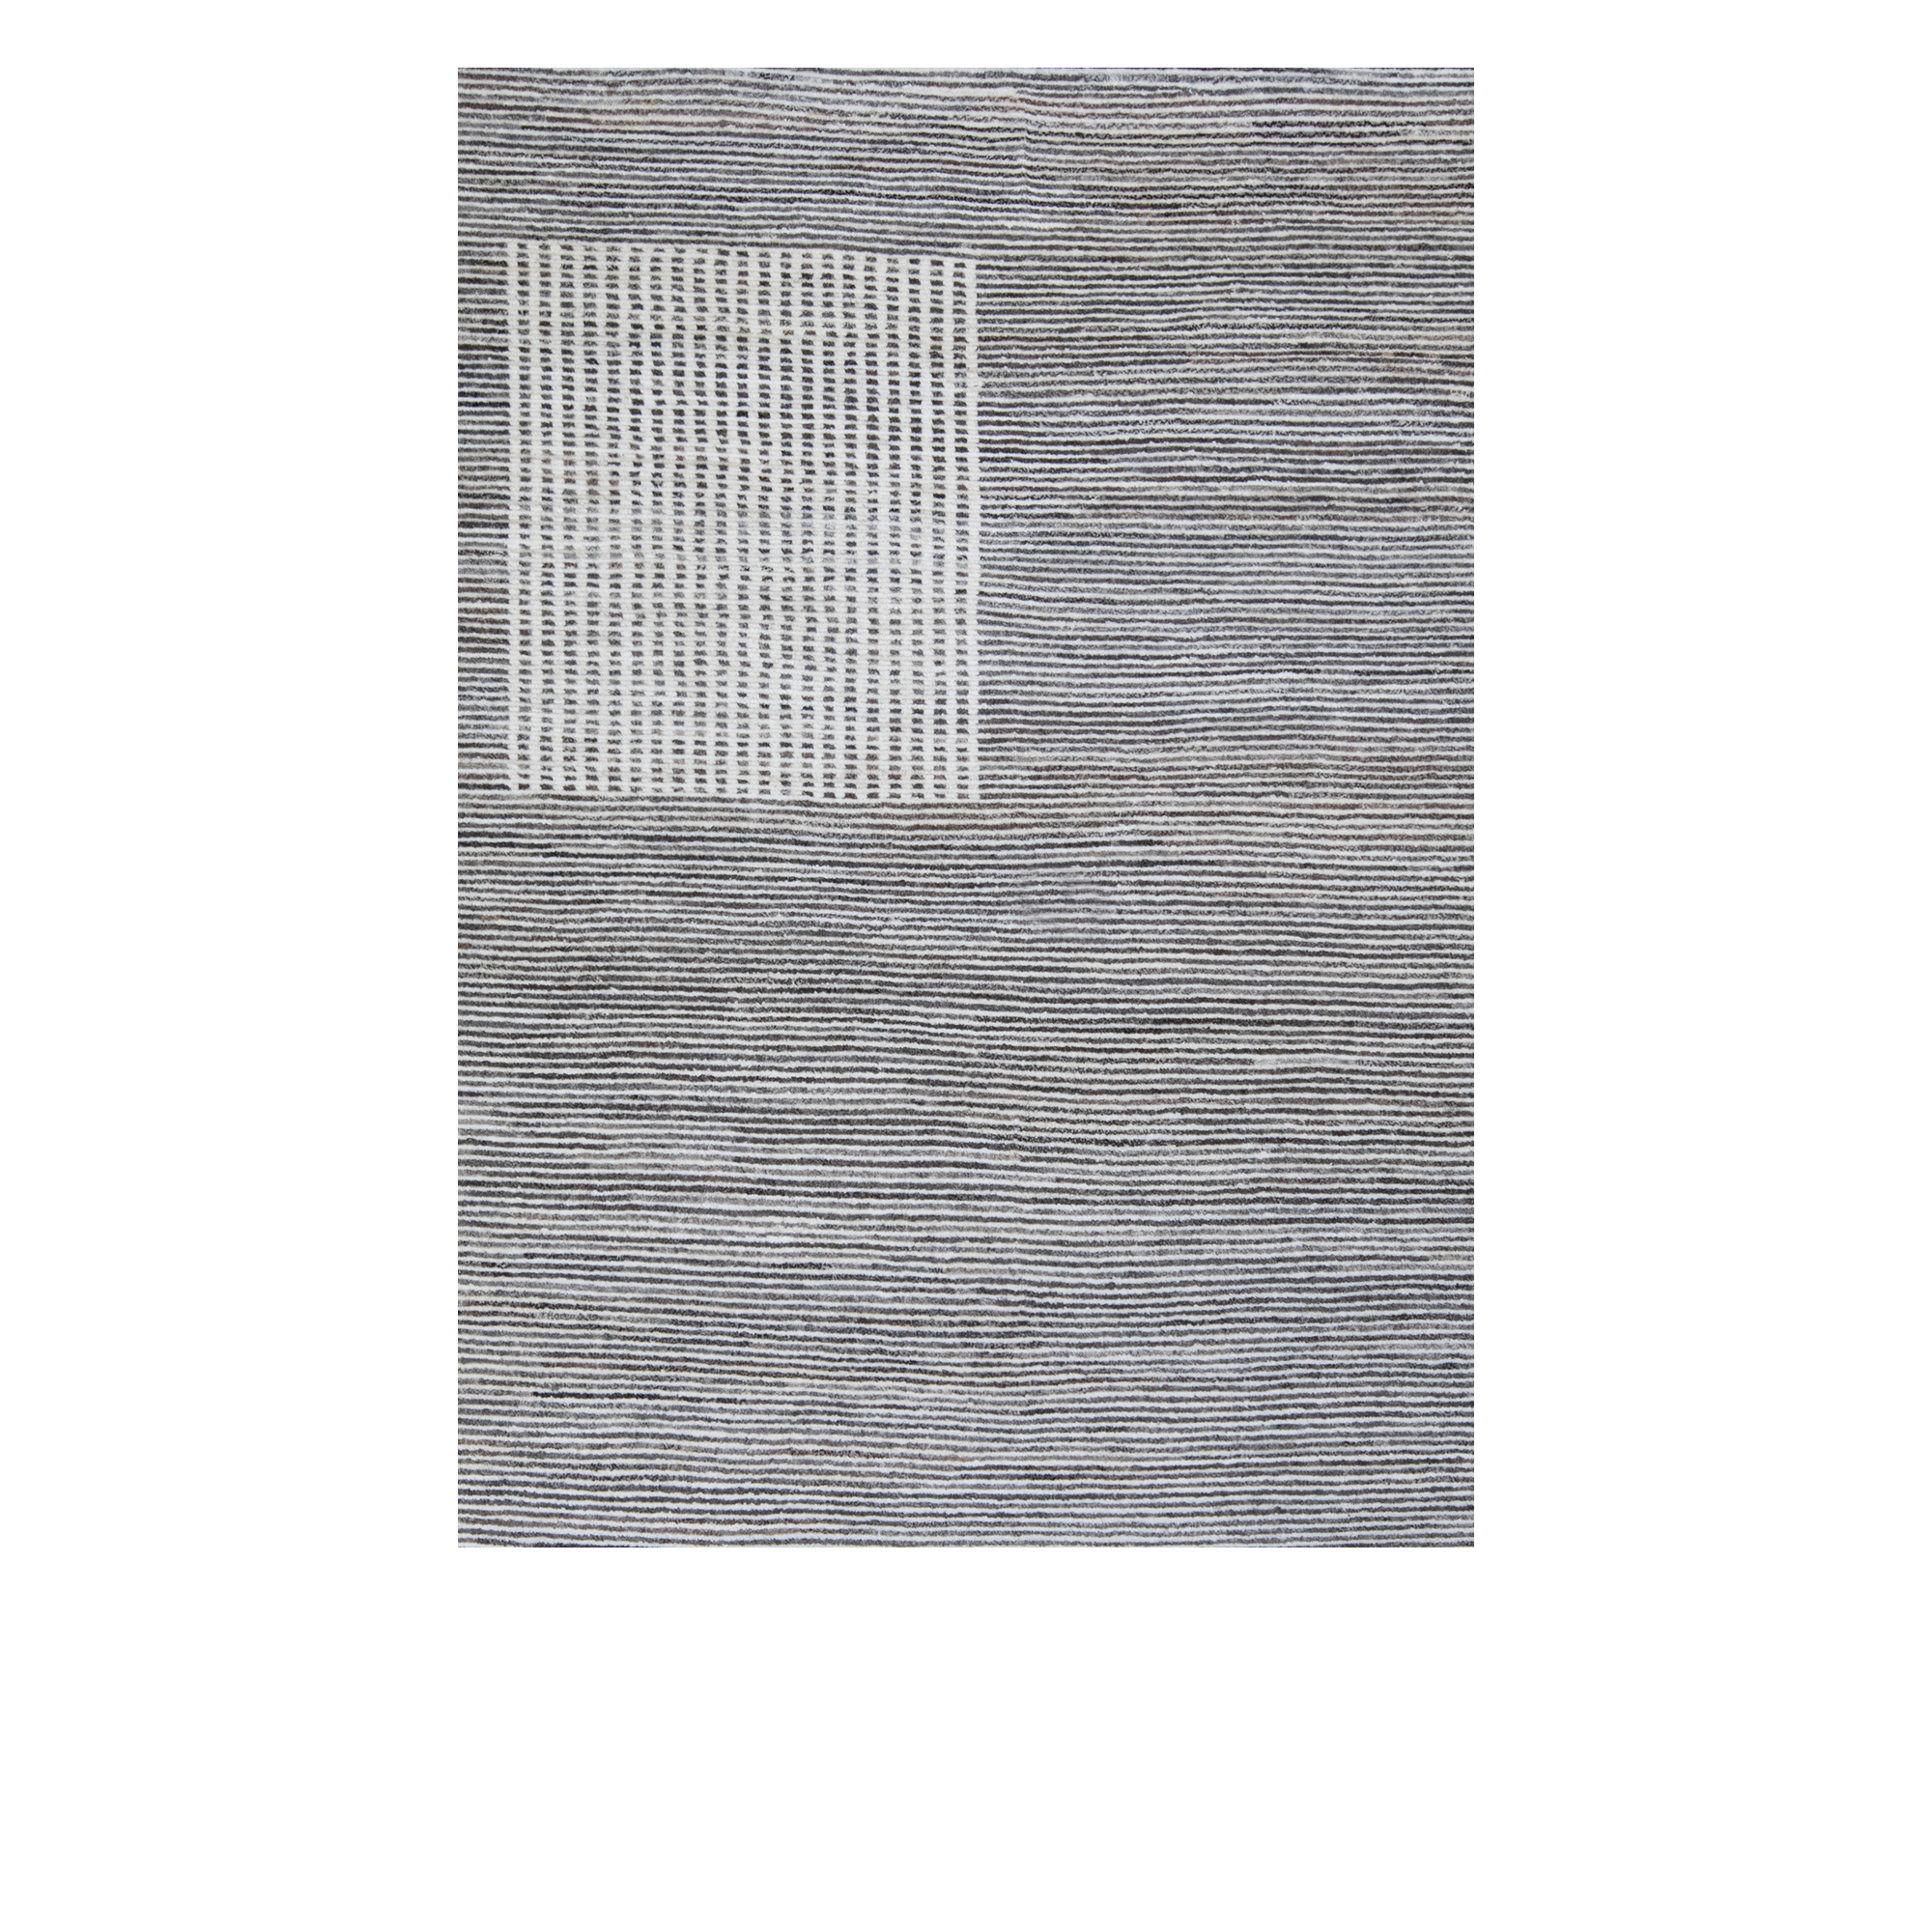 Terrain rug is a hand-knotted modern rug made from un-dyed wool and natural tones. 